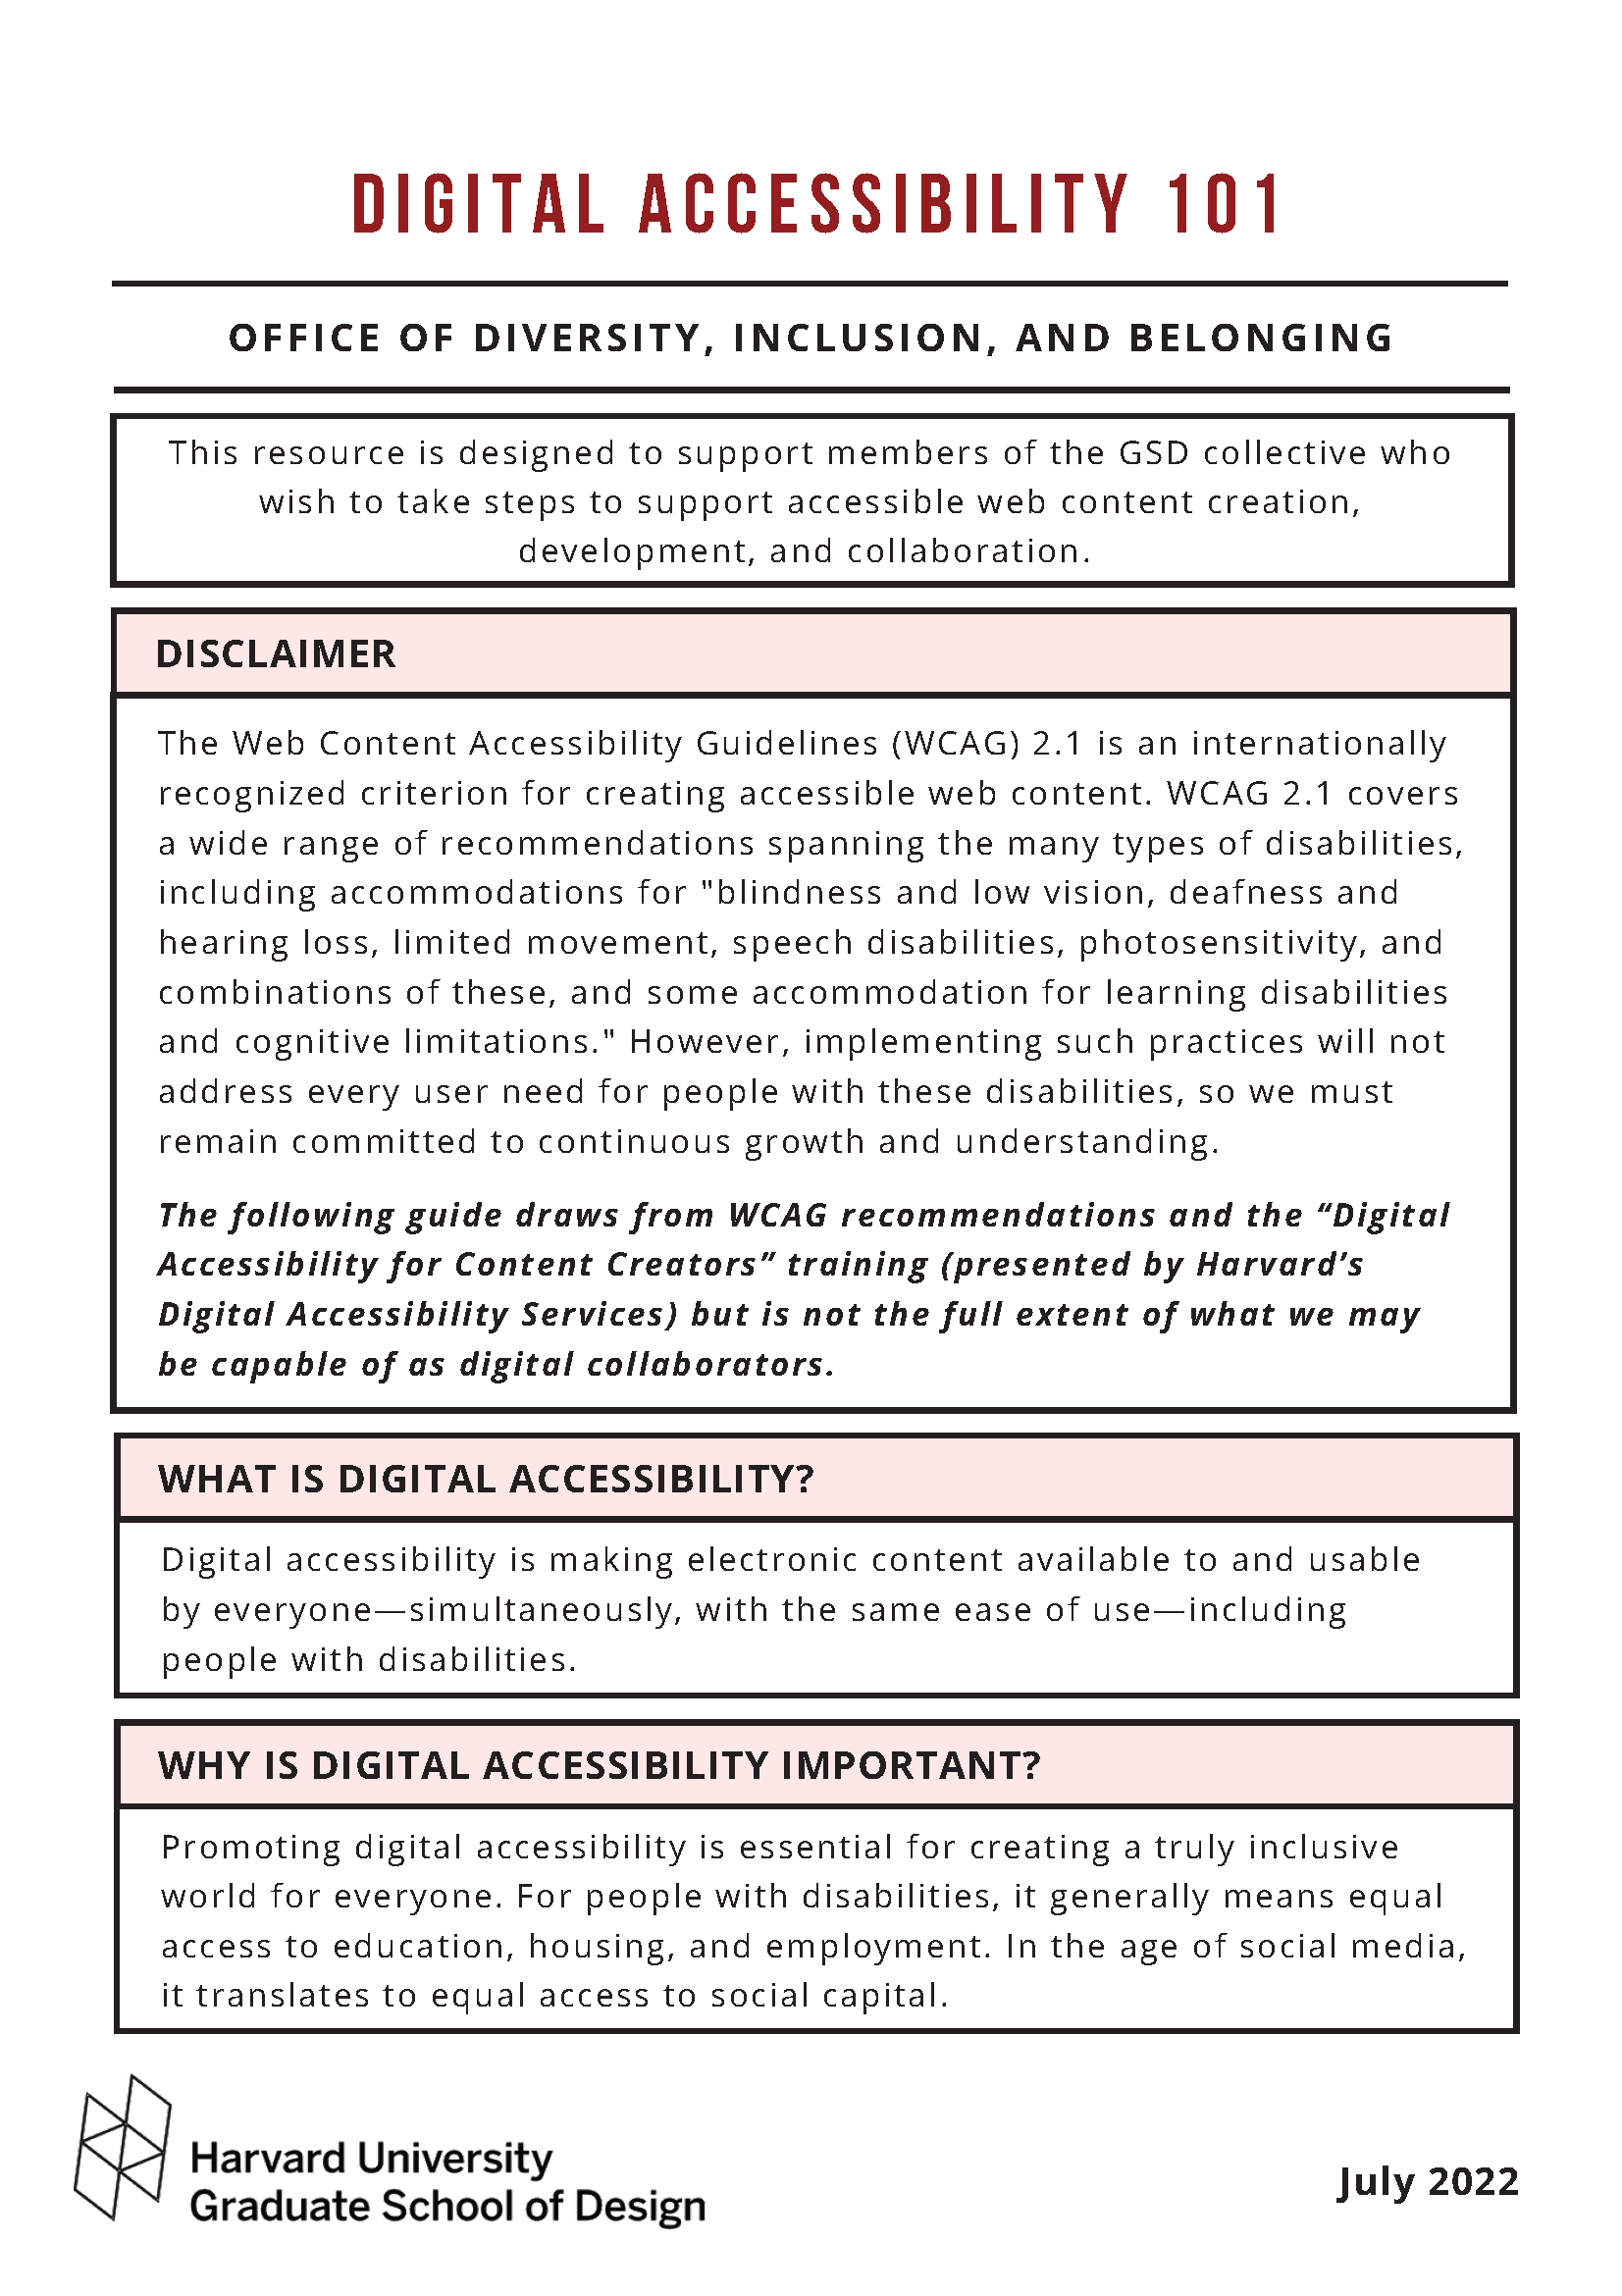 First page of Digital Accessibility Resource guide. Click the image or the button to be brought to the full PDF.